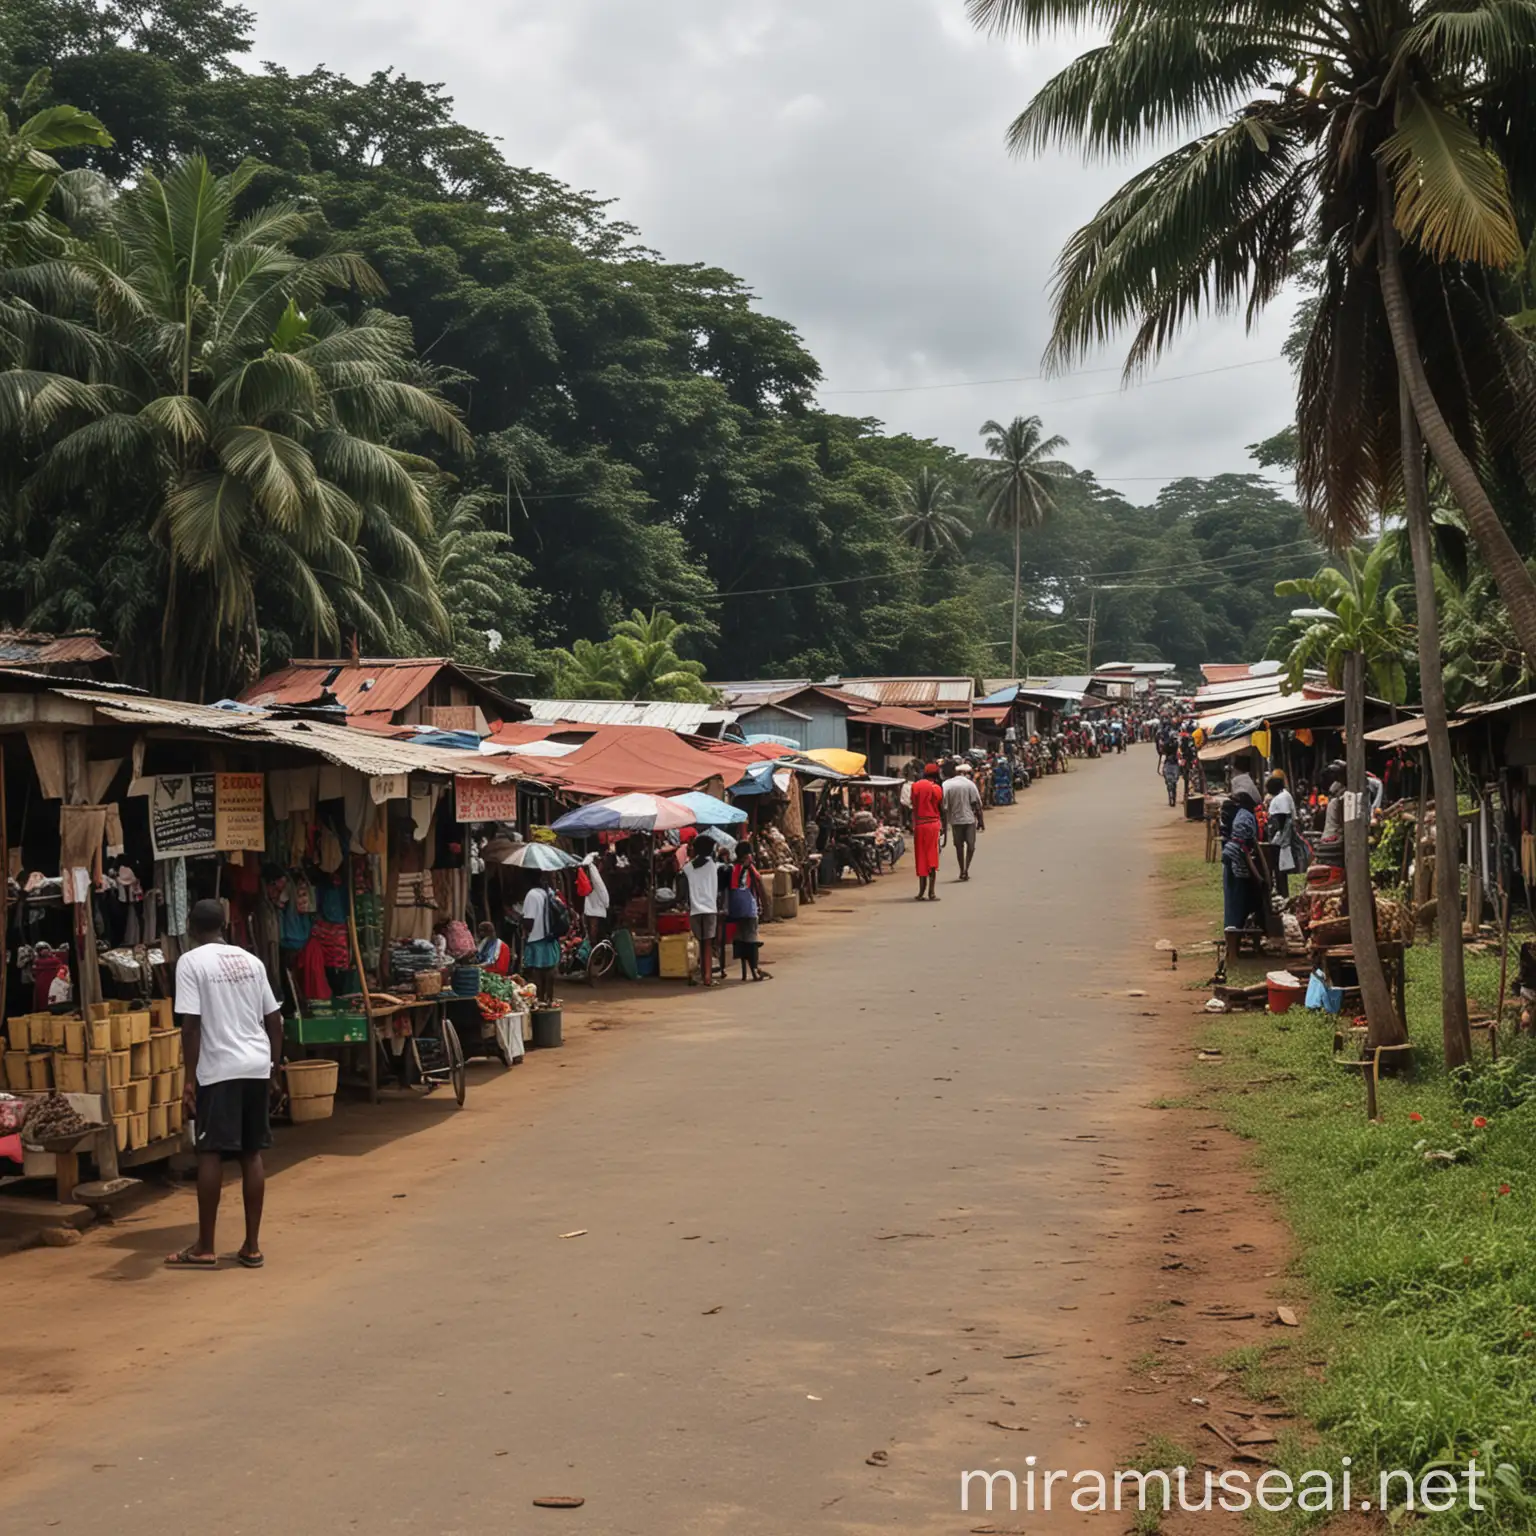 Vibrant Markets of Monrovia and Serene Landscapes of Sapo National Park in Liberia Loop